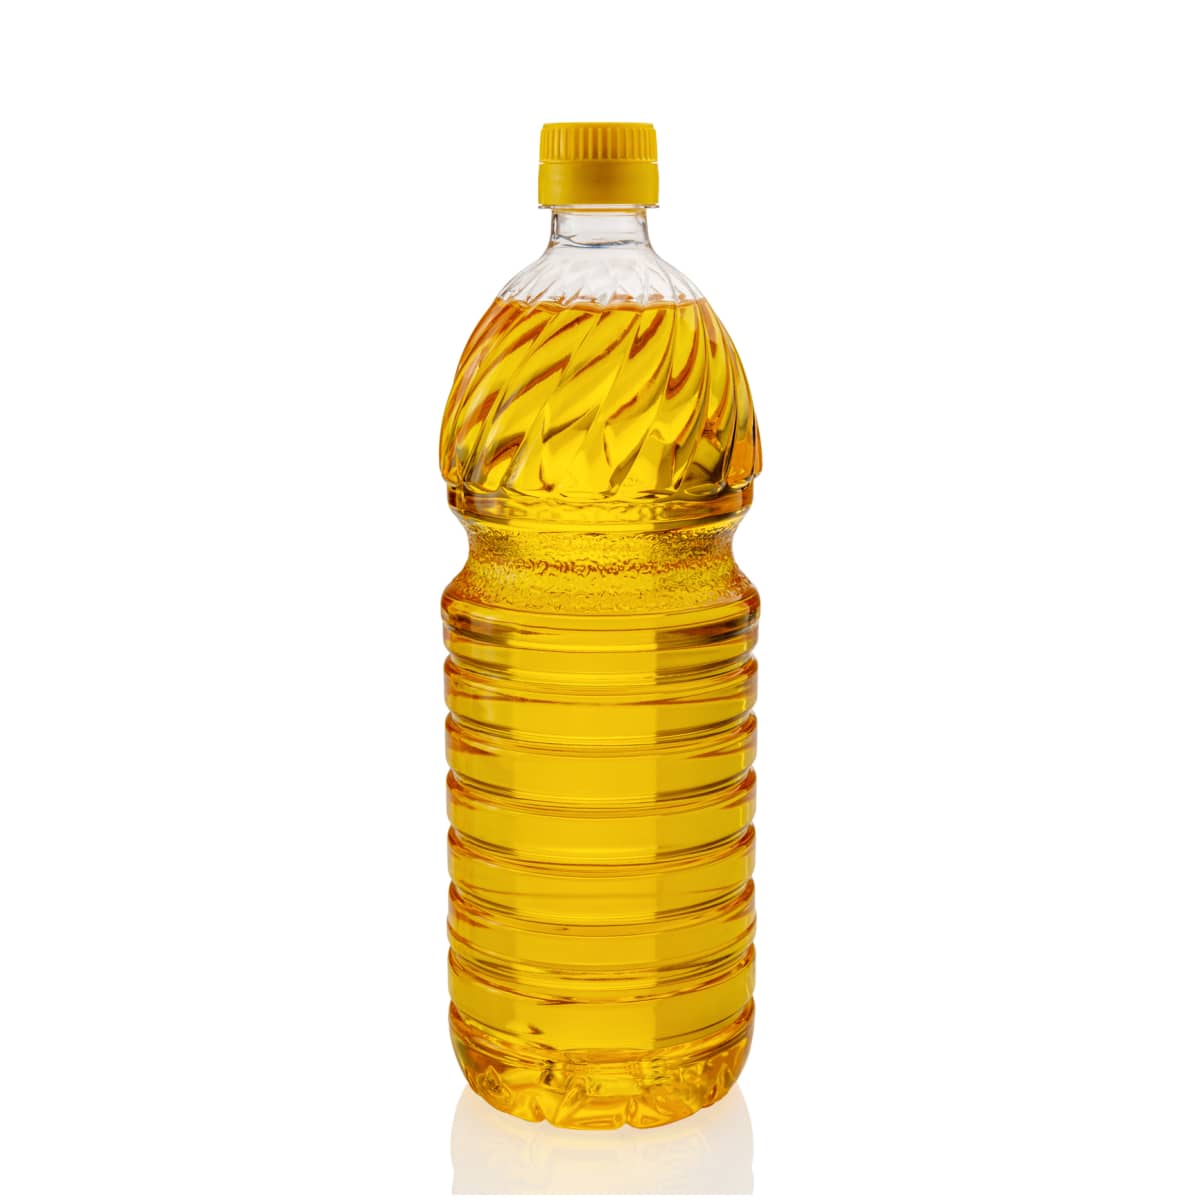 Vegetable oil in plastic bottle, corn oil for frying and cooking, isolated on white